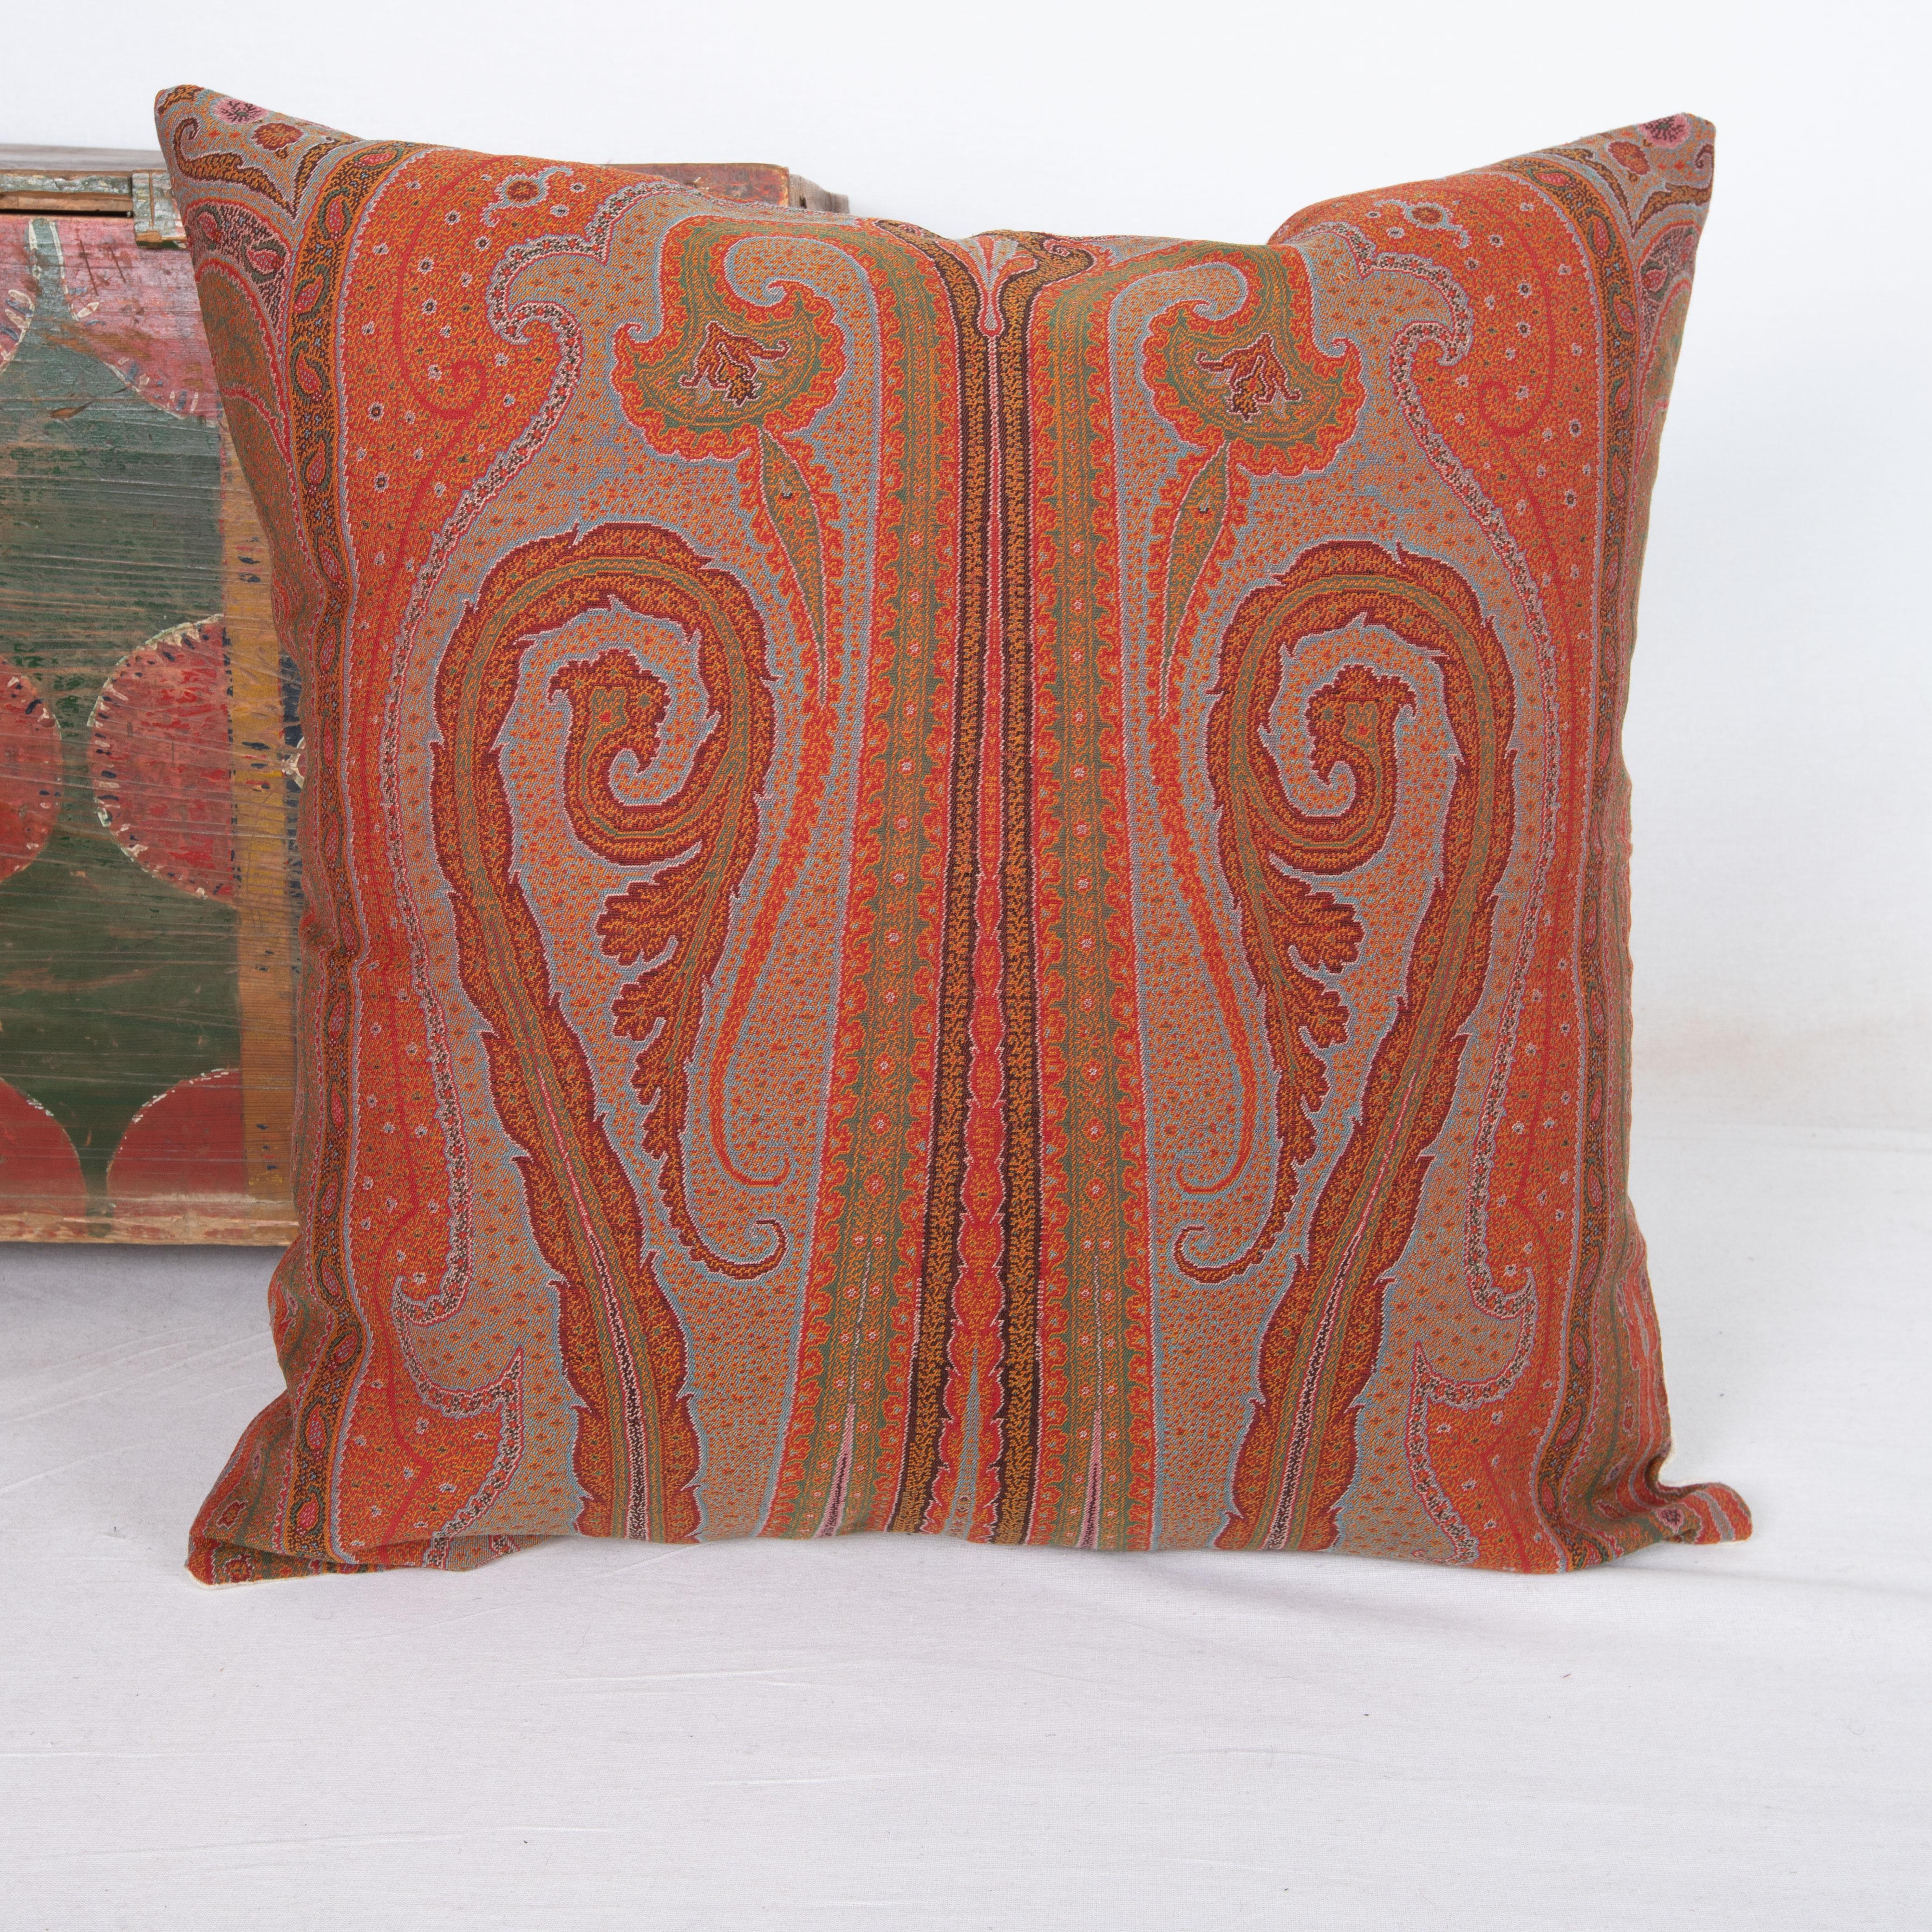 Antique  Pillow Cover made from a European Wool Paisley Shawl, L 19th/ E.20th  For Sale 1